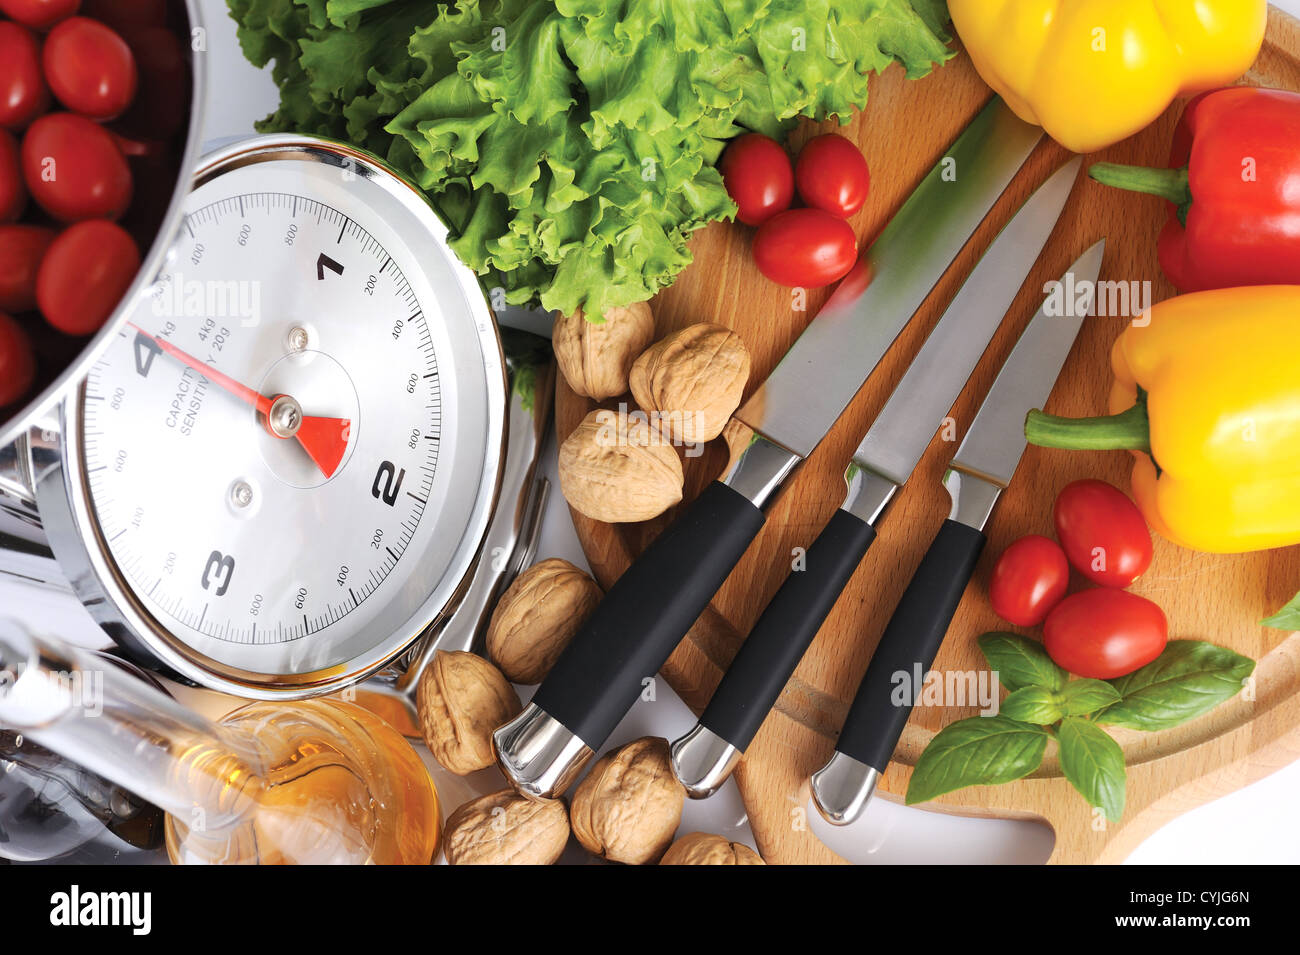 tools for cooking italian style Stock Photo